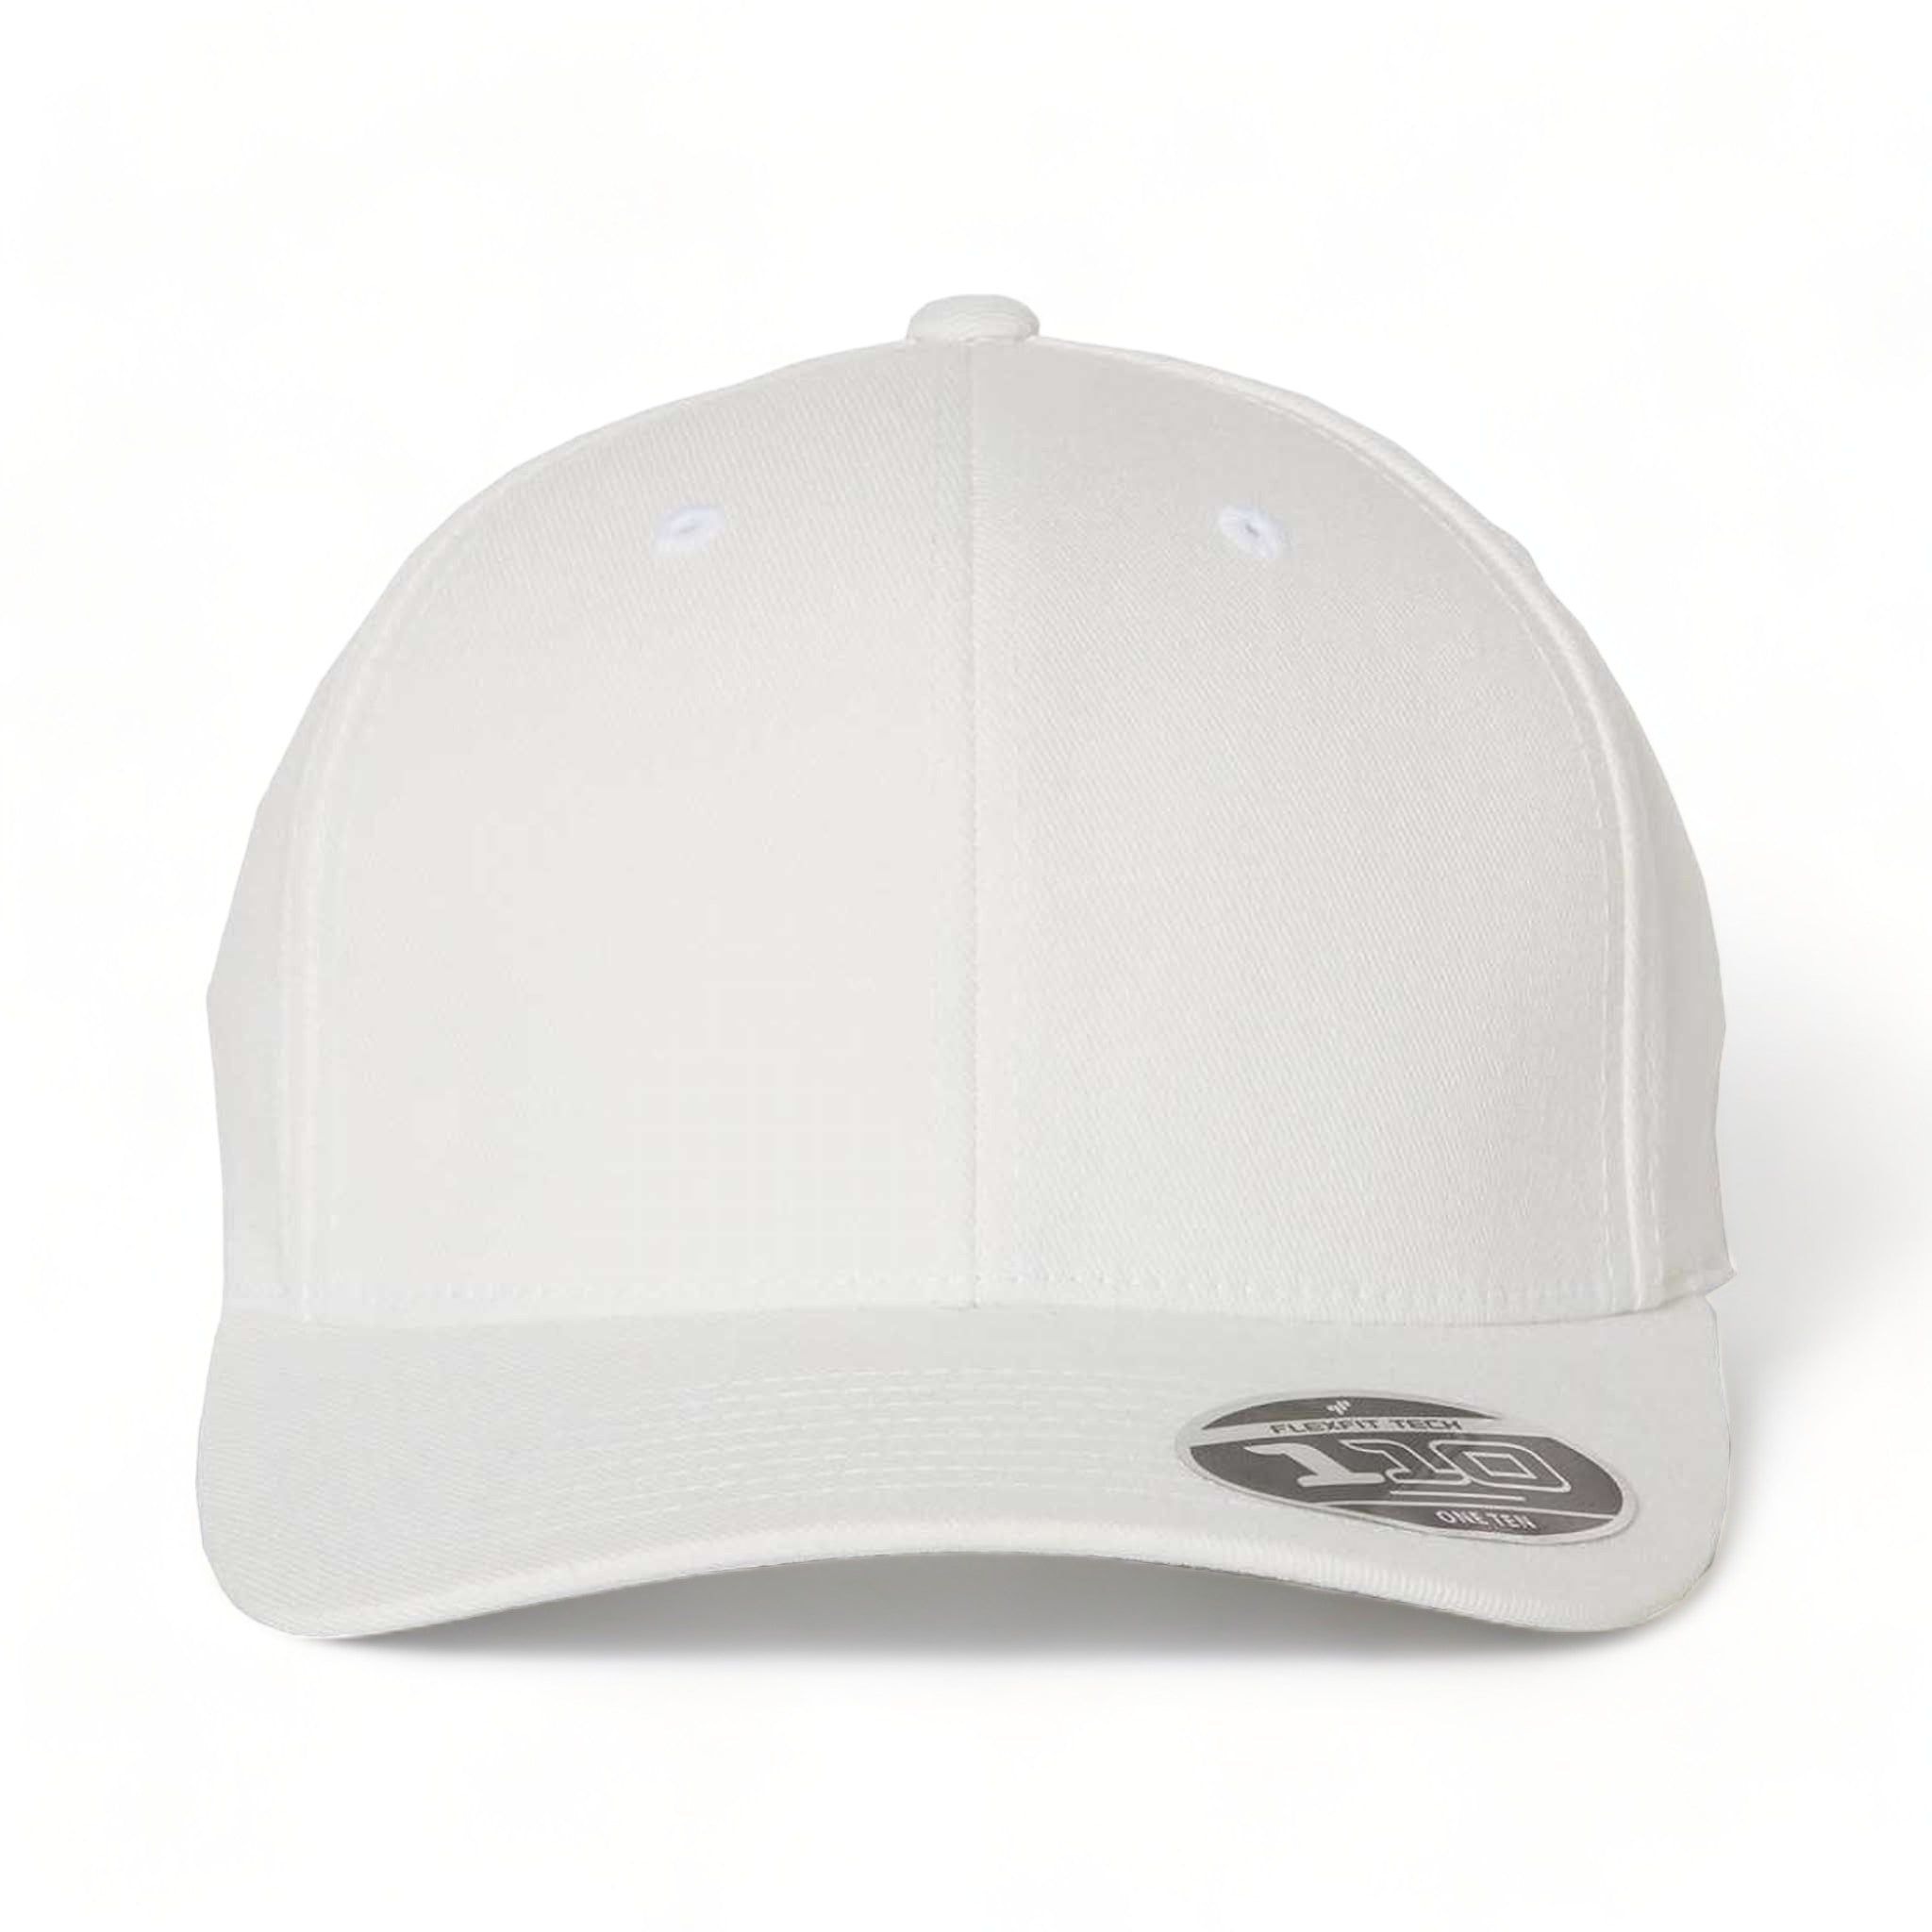 Front view of Flexfit 110C custom hat in white